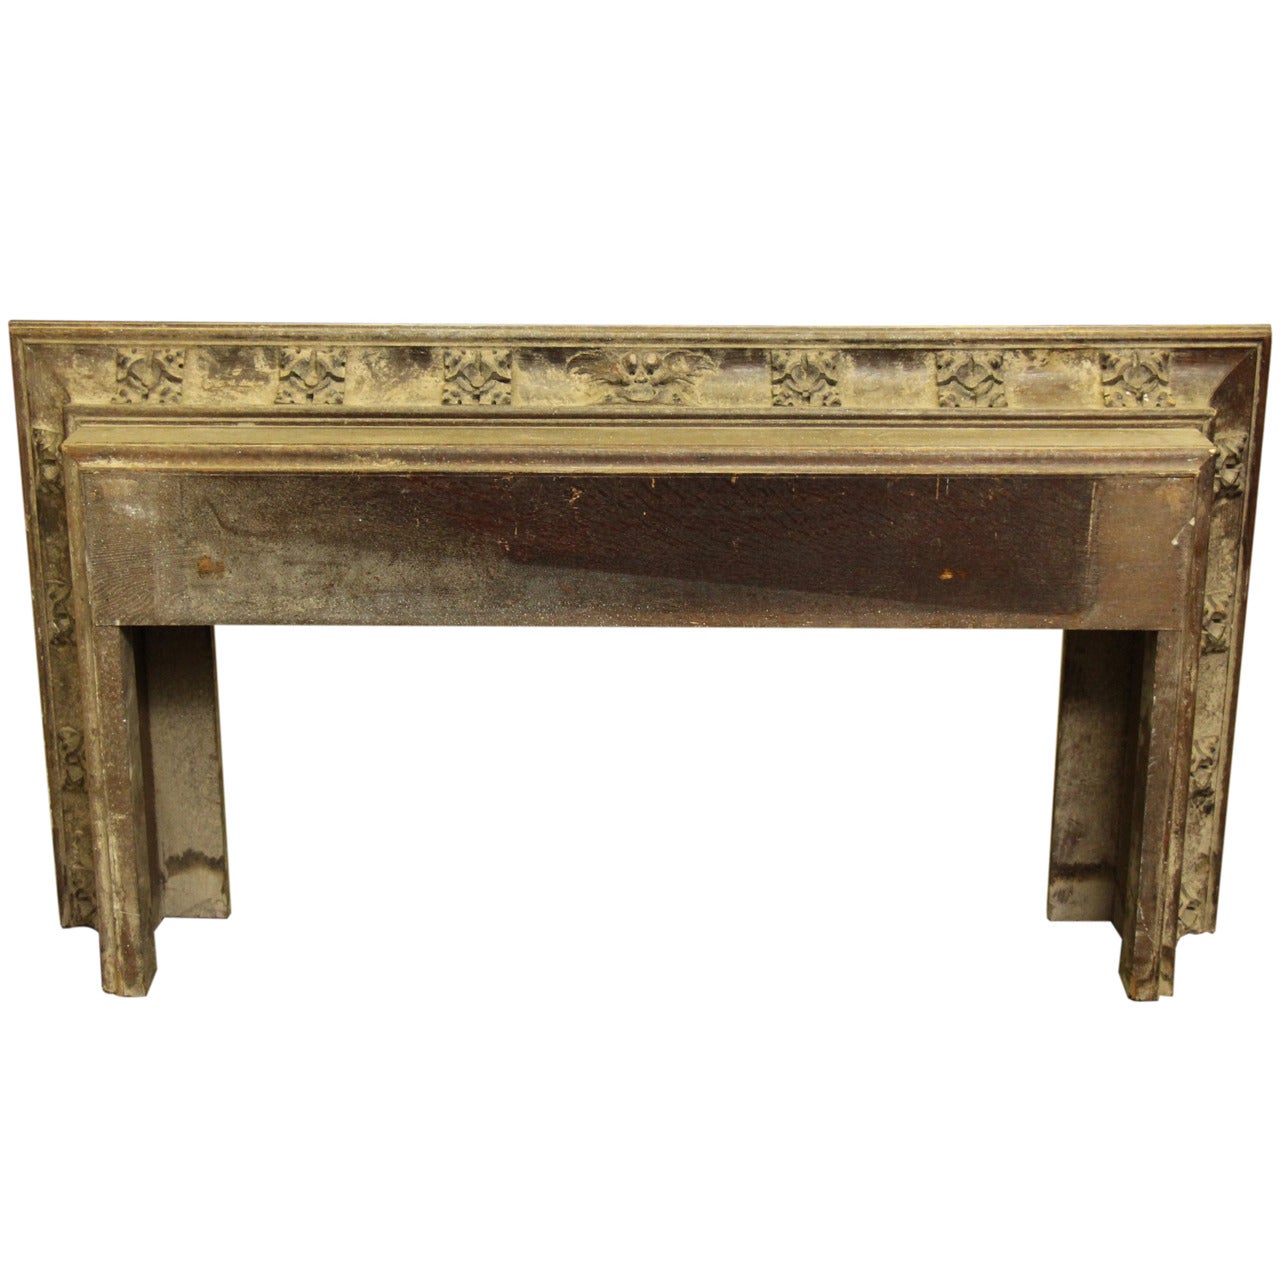 18th century wooden chimney mantel with carved details from France. Slightly worn. Please note, this item is located in our Scranton, PA location.